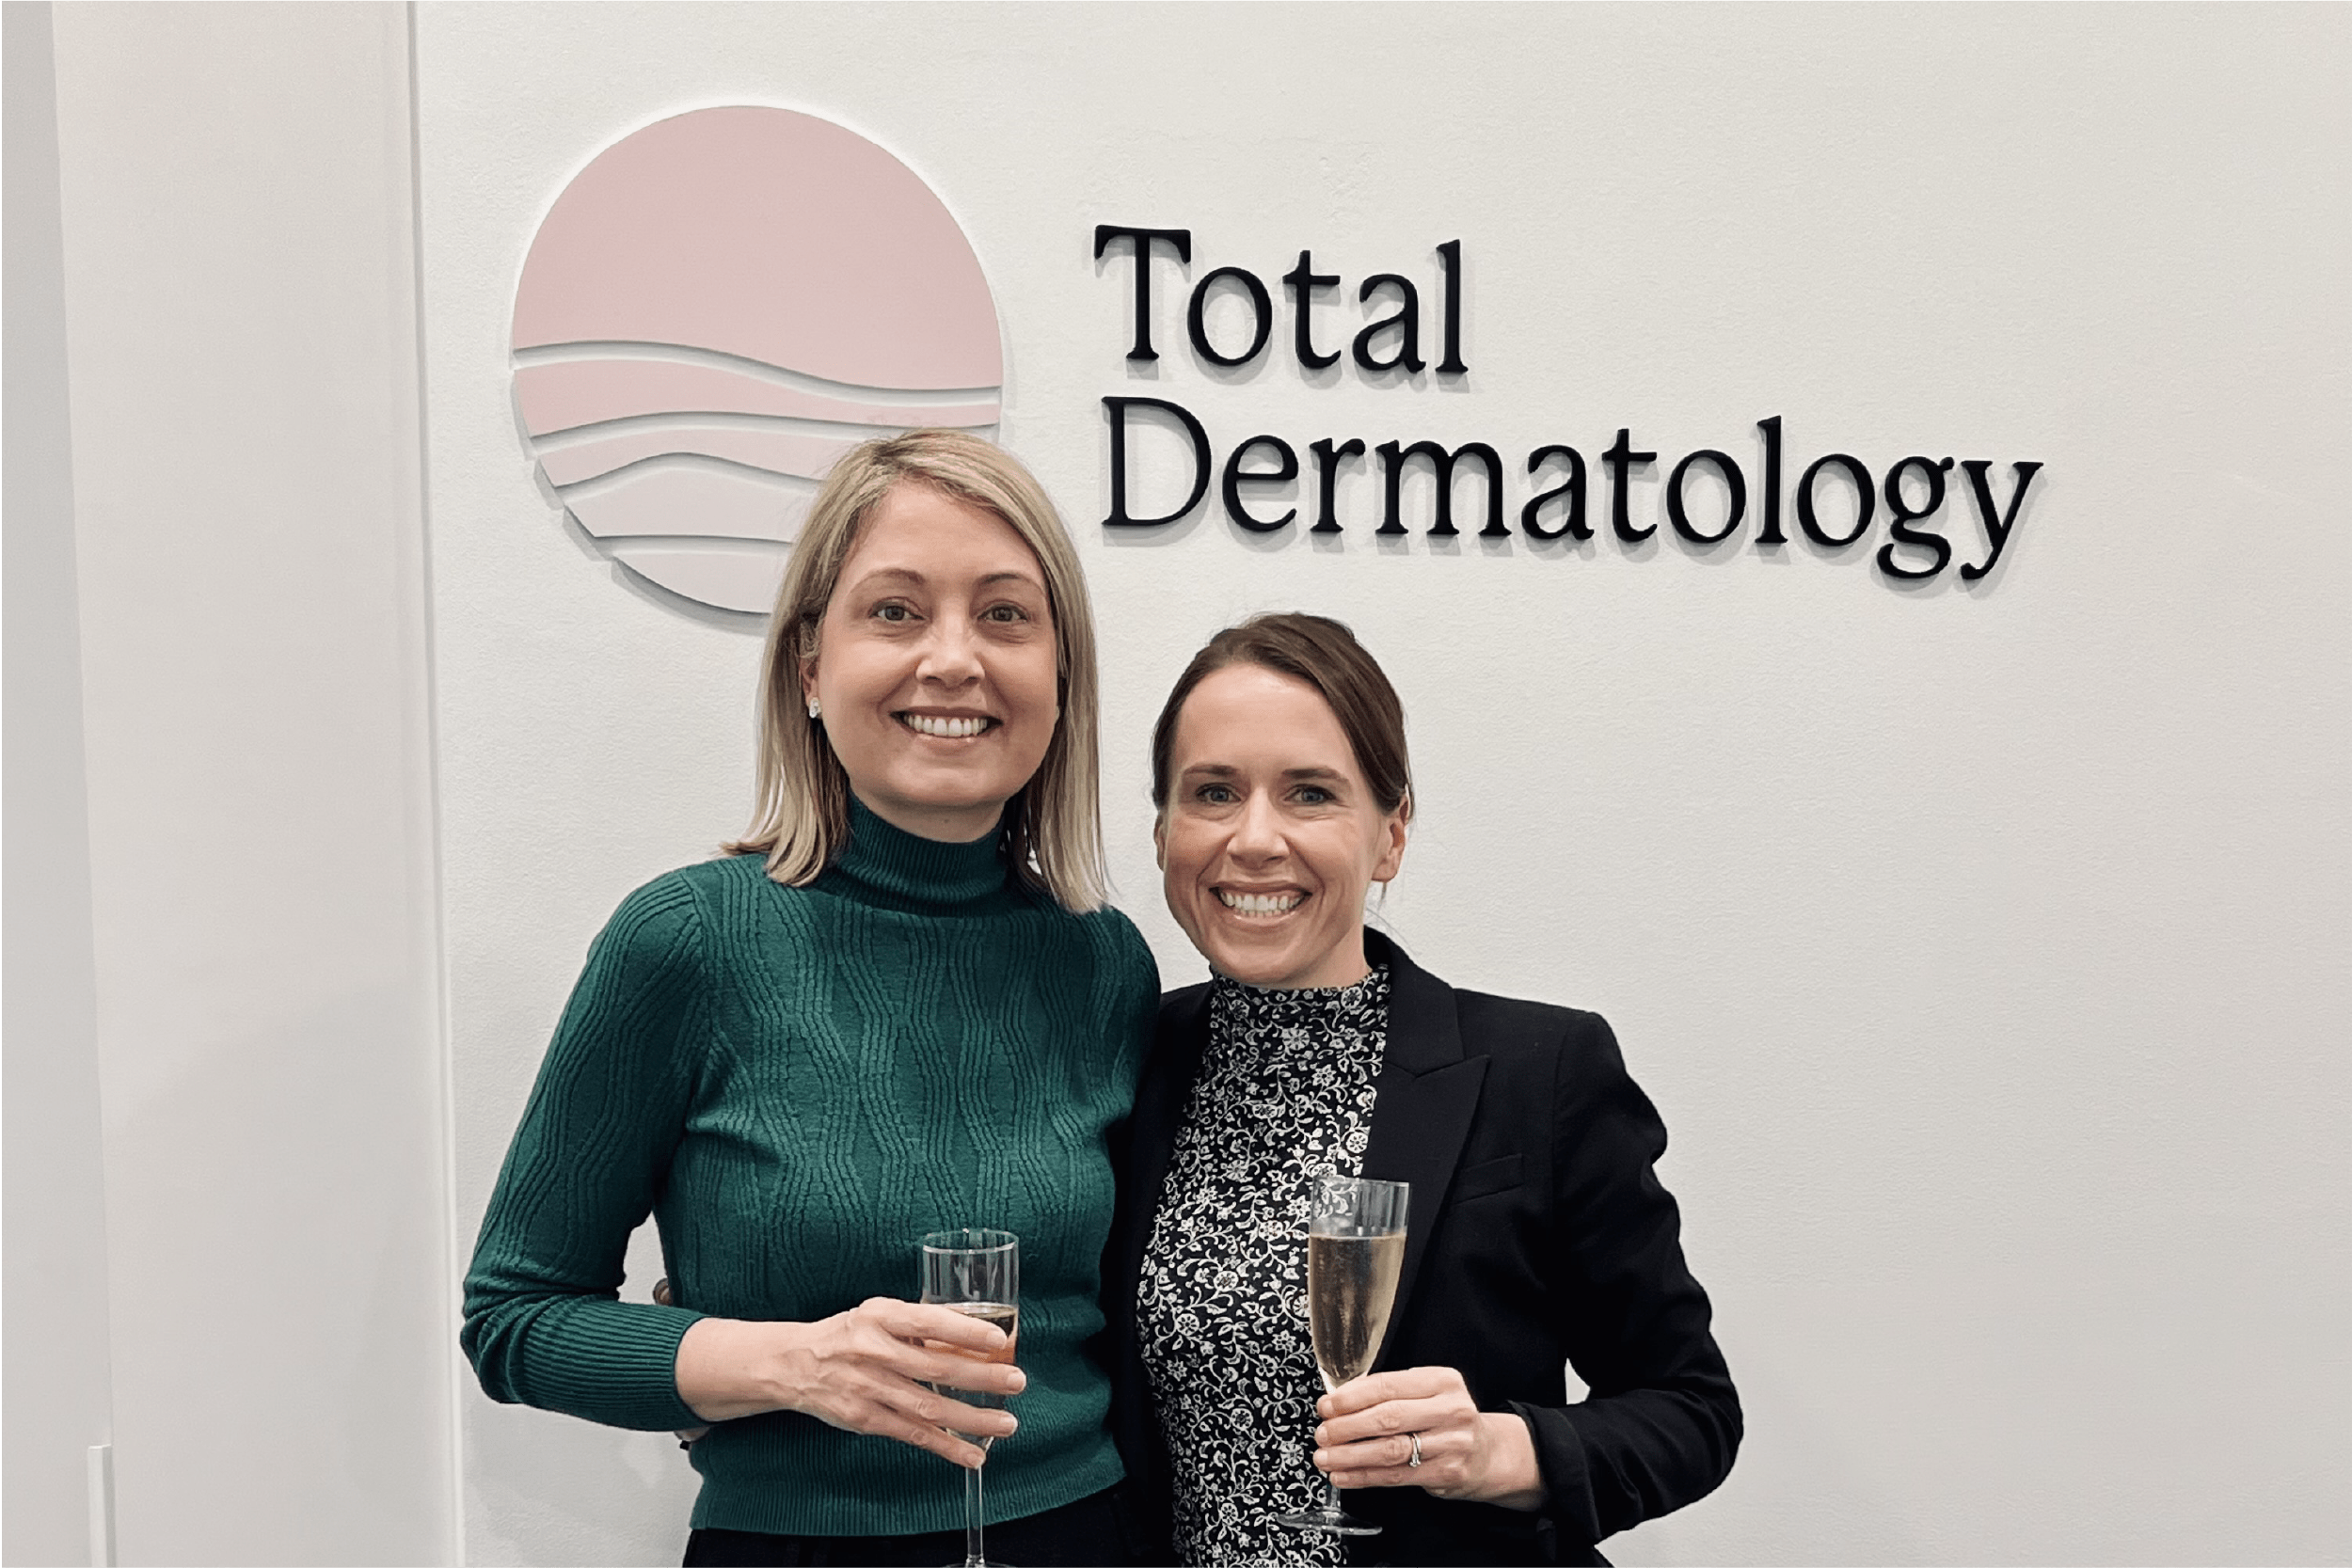 Total Dermatology Dr Emma Ryan and Dr Kate Newland